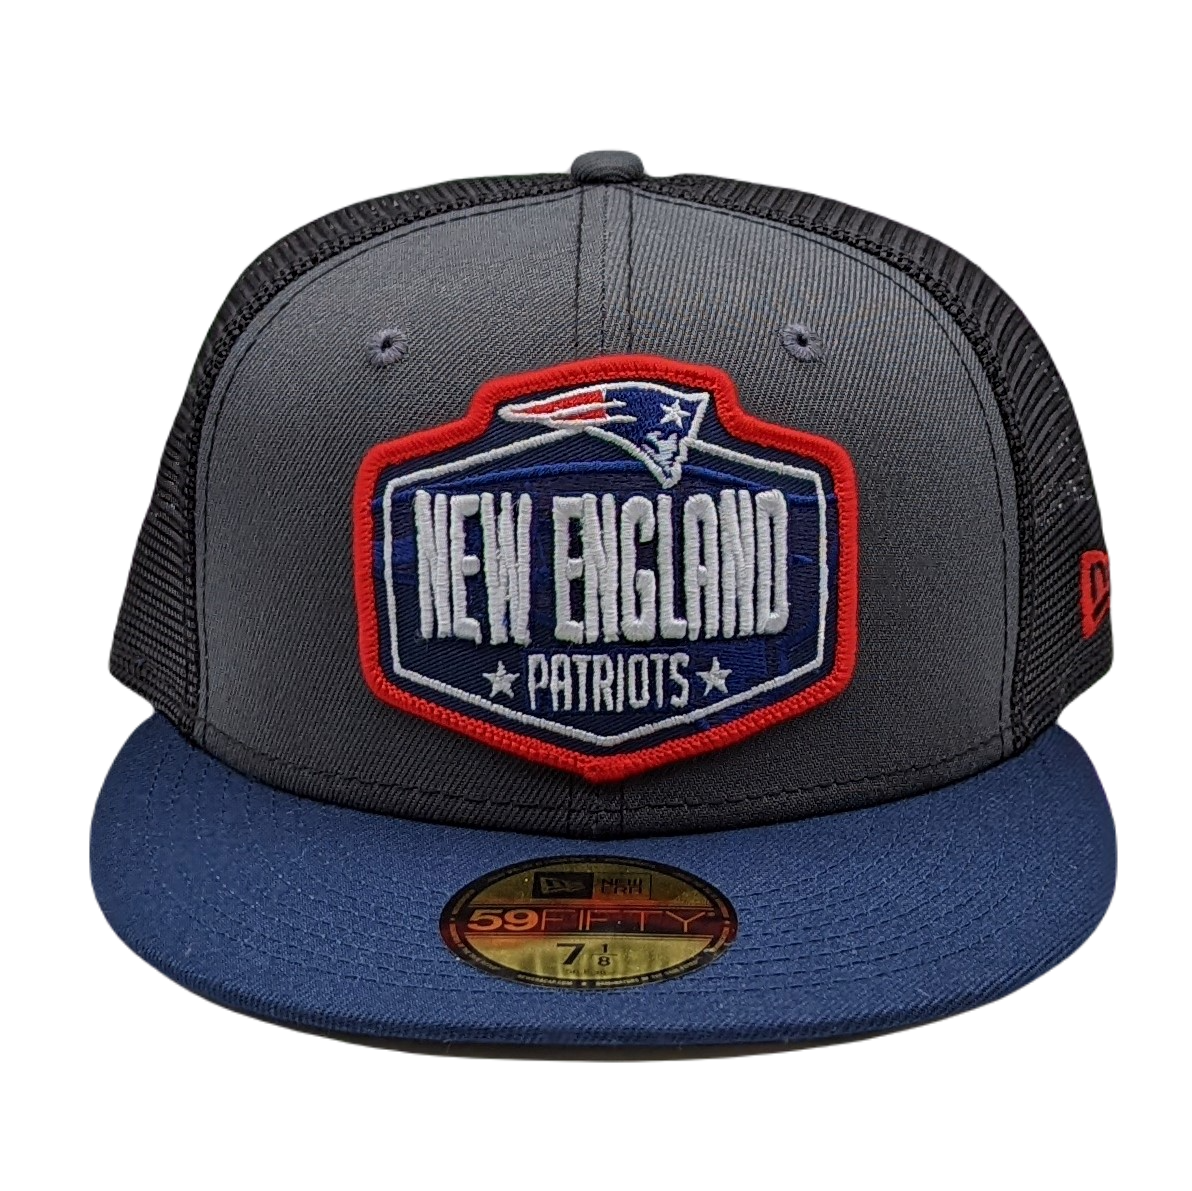 New Era 59Fifty New England Patriots Fitted Trucker Hat